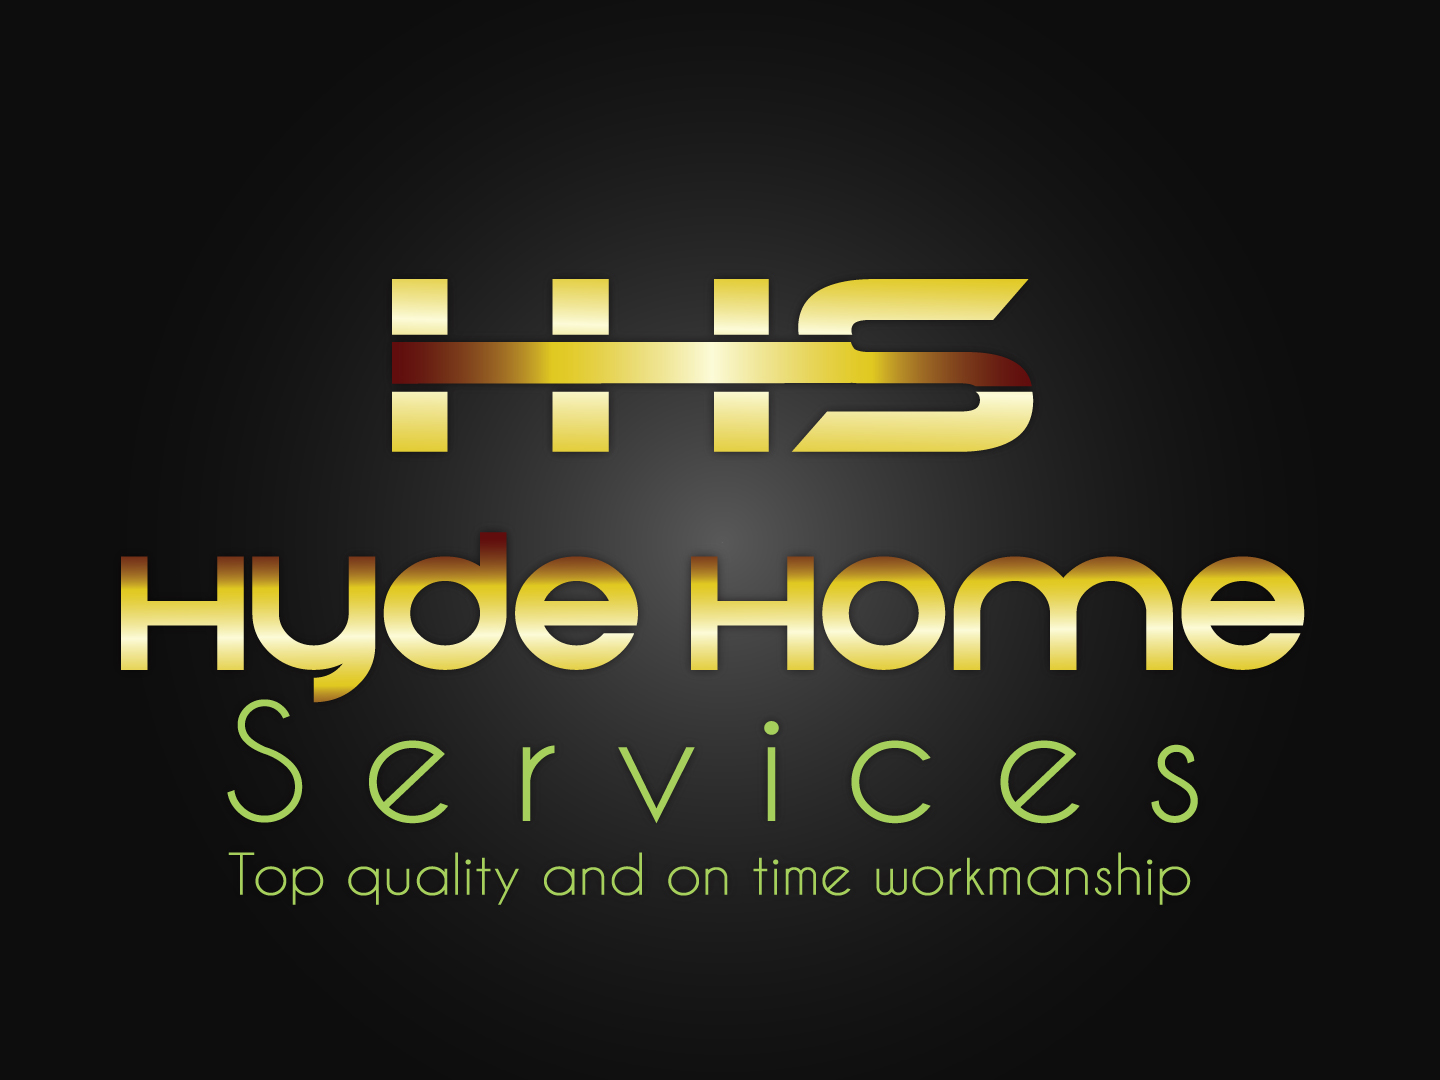 Hyde Home Services